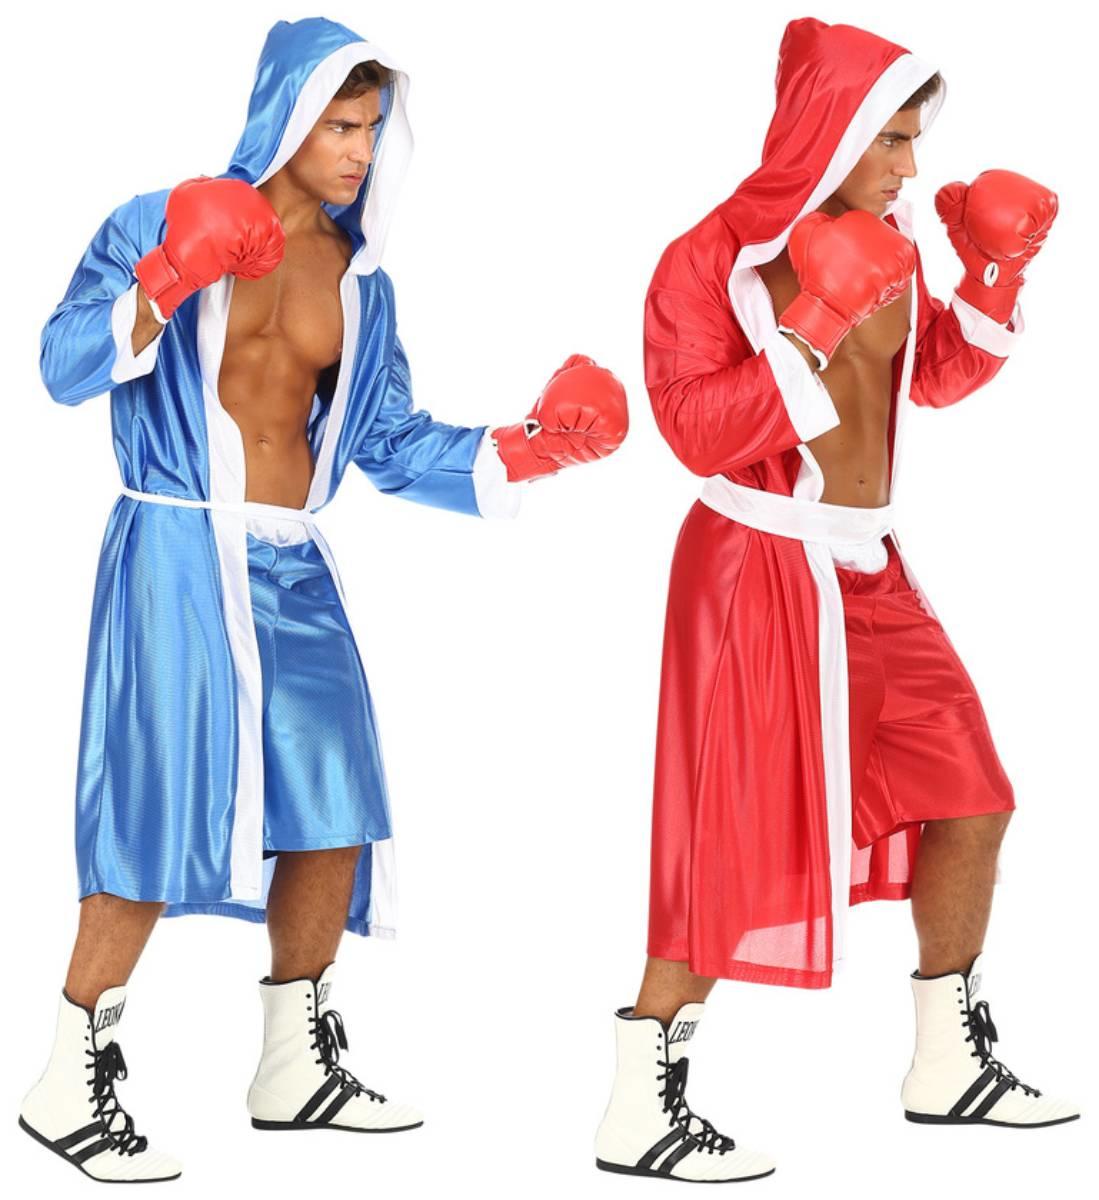 Men's Boxing costume in red or blue by Widmann 35271 / 35272 available here at Karnival Costumes online party shop